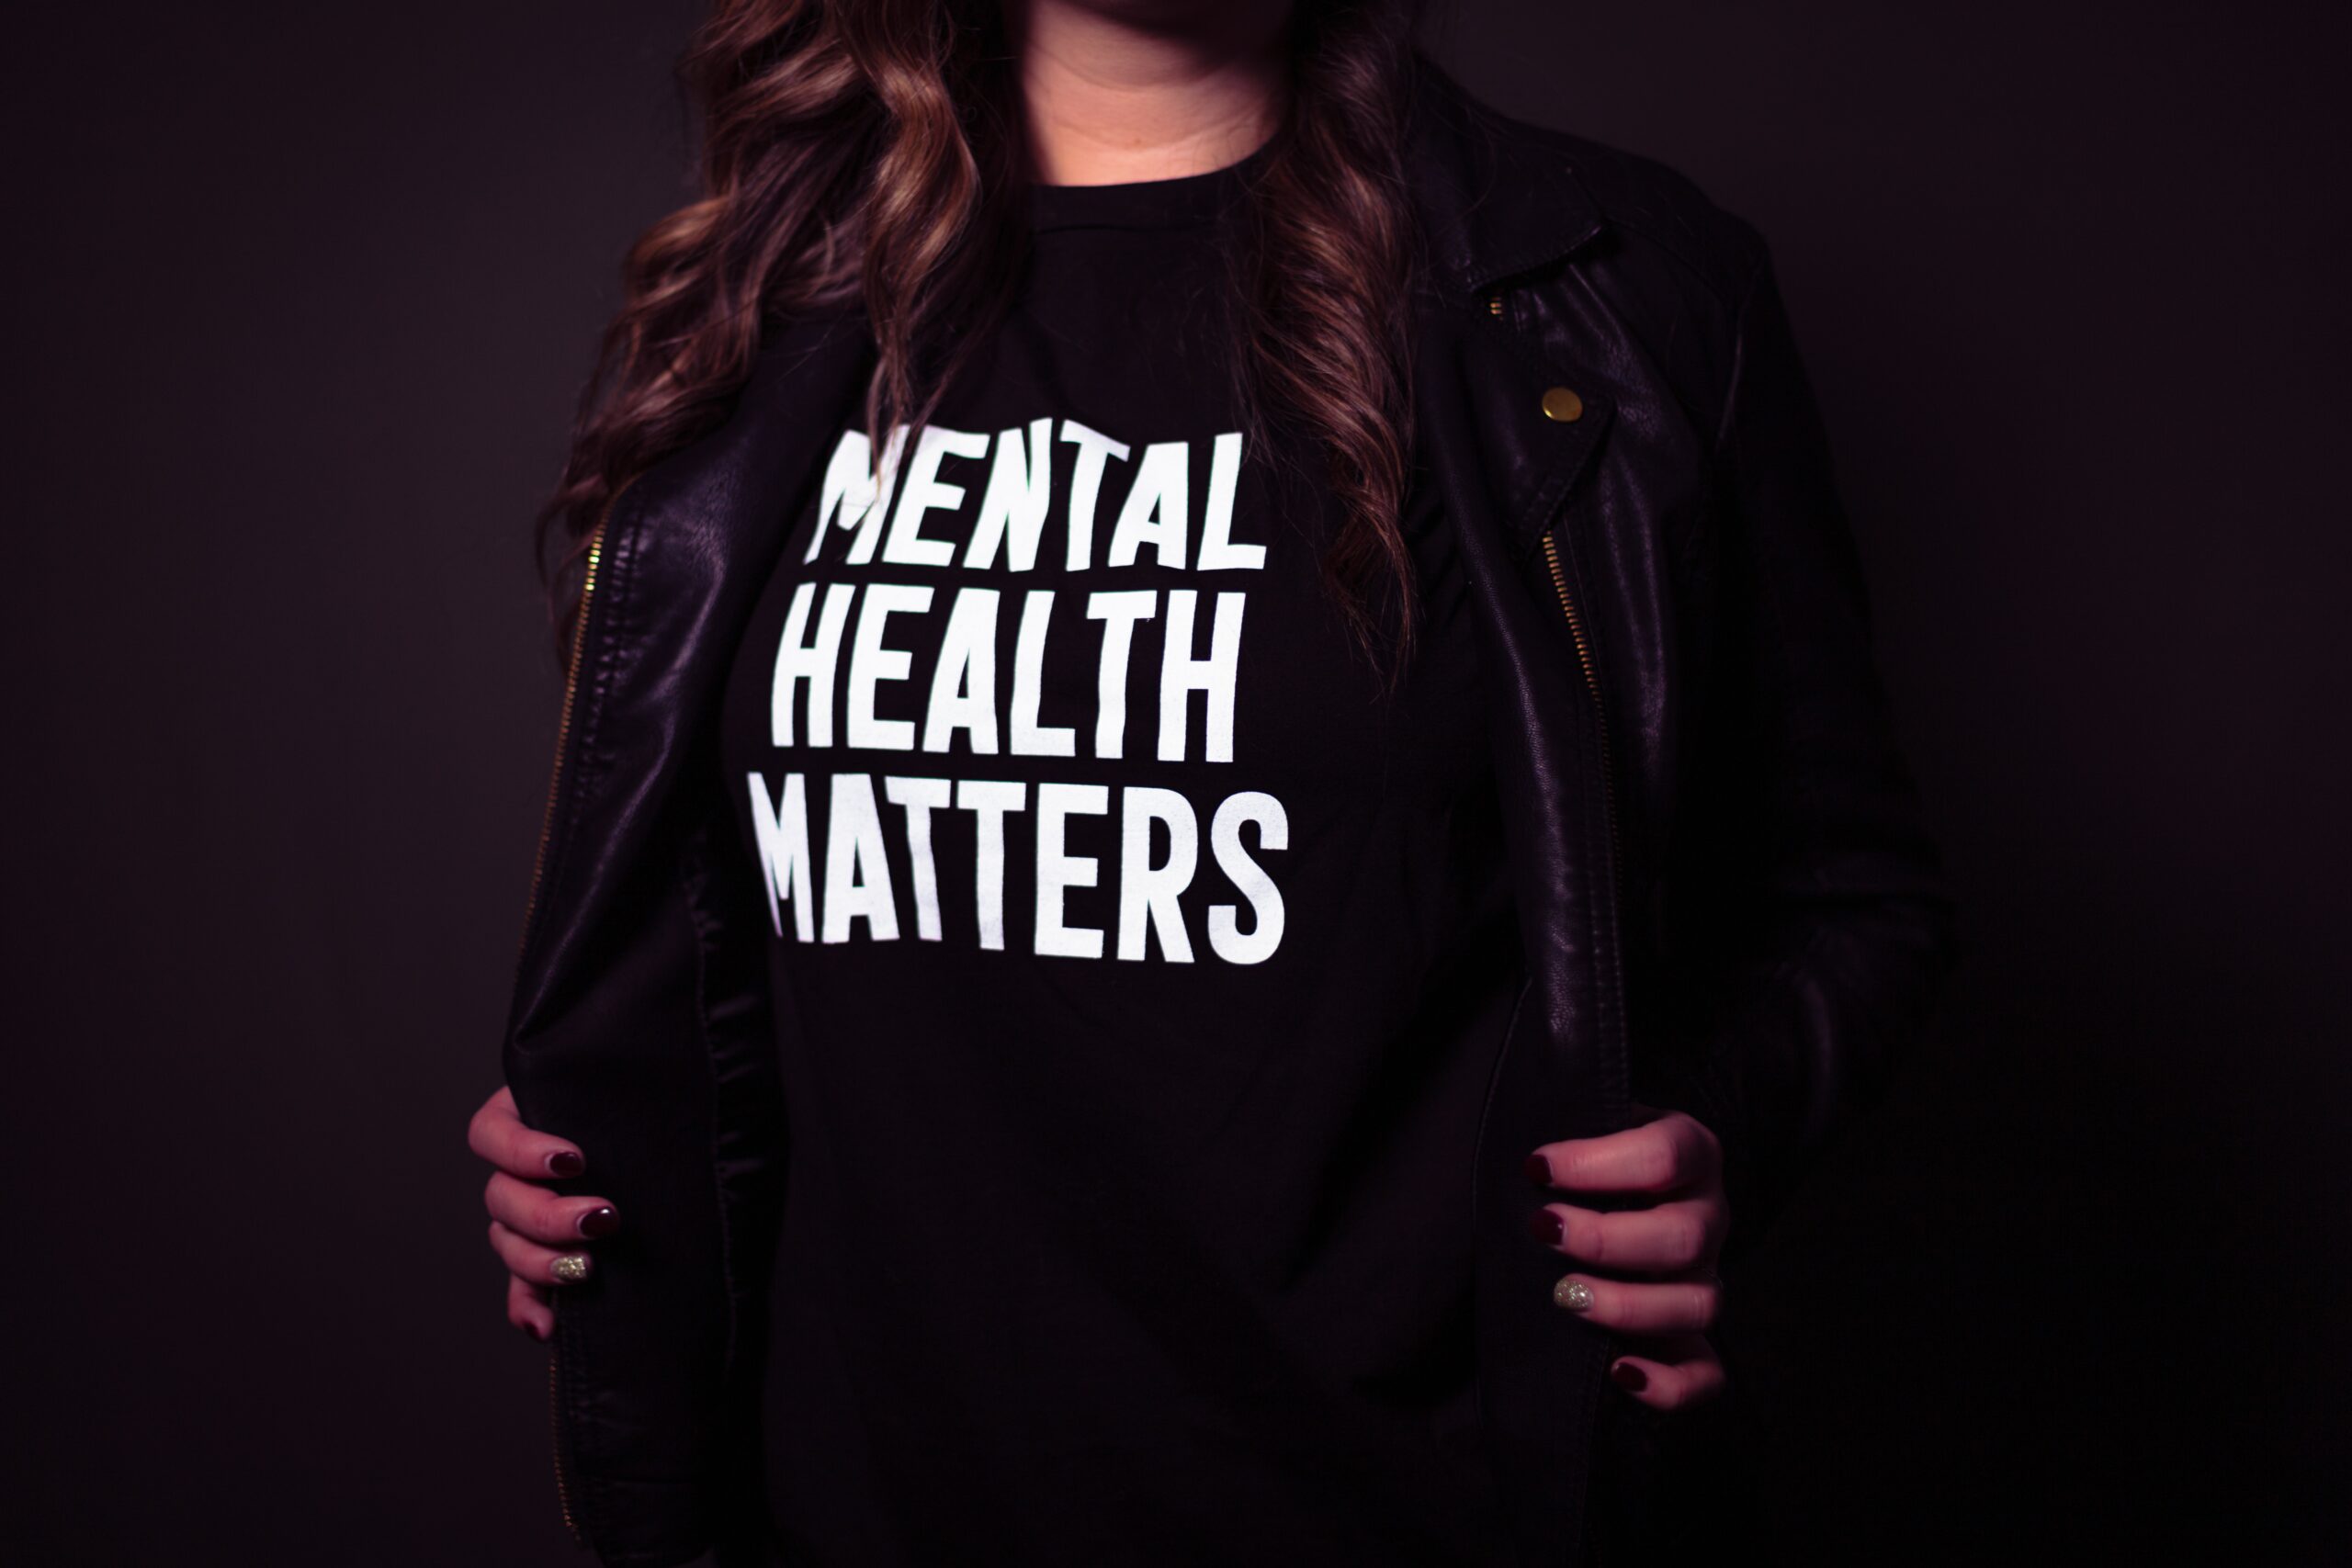 A photo of a woman revealing a Tshirt that reads Mental Health Matters